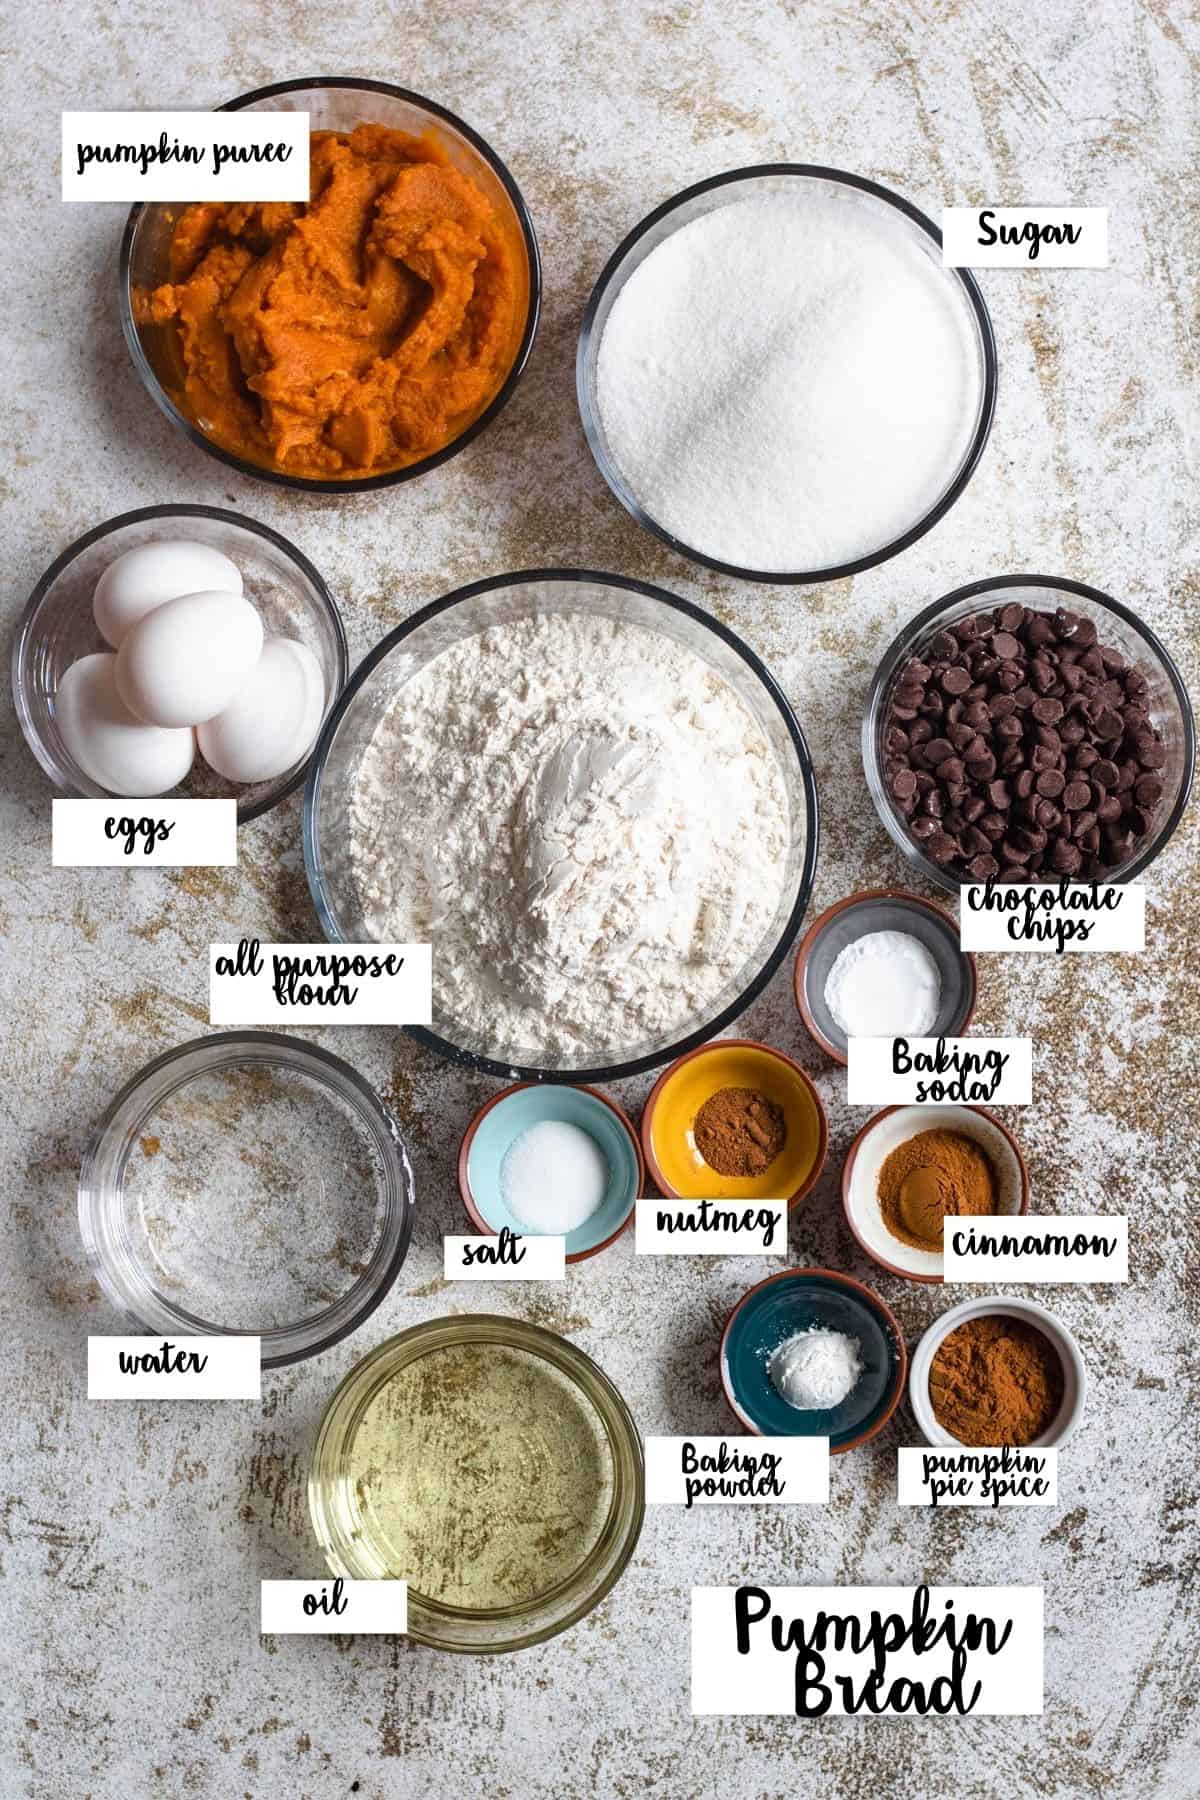 Ingredients shown are used to bake up a loaf of pumpkin bread. 